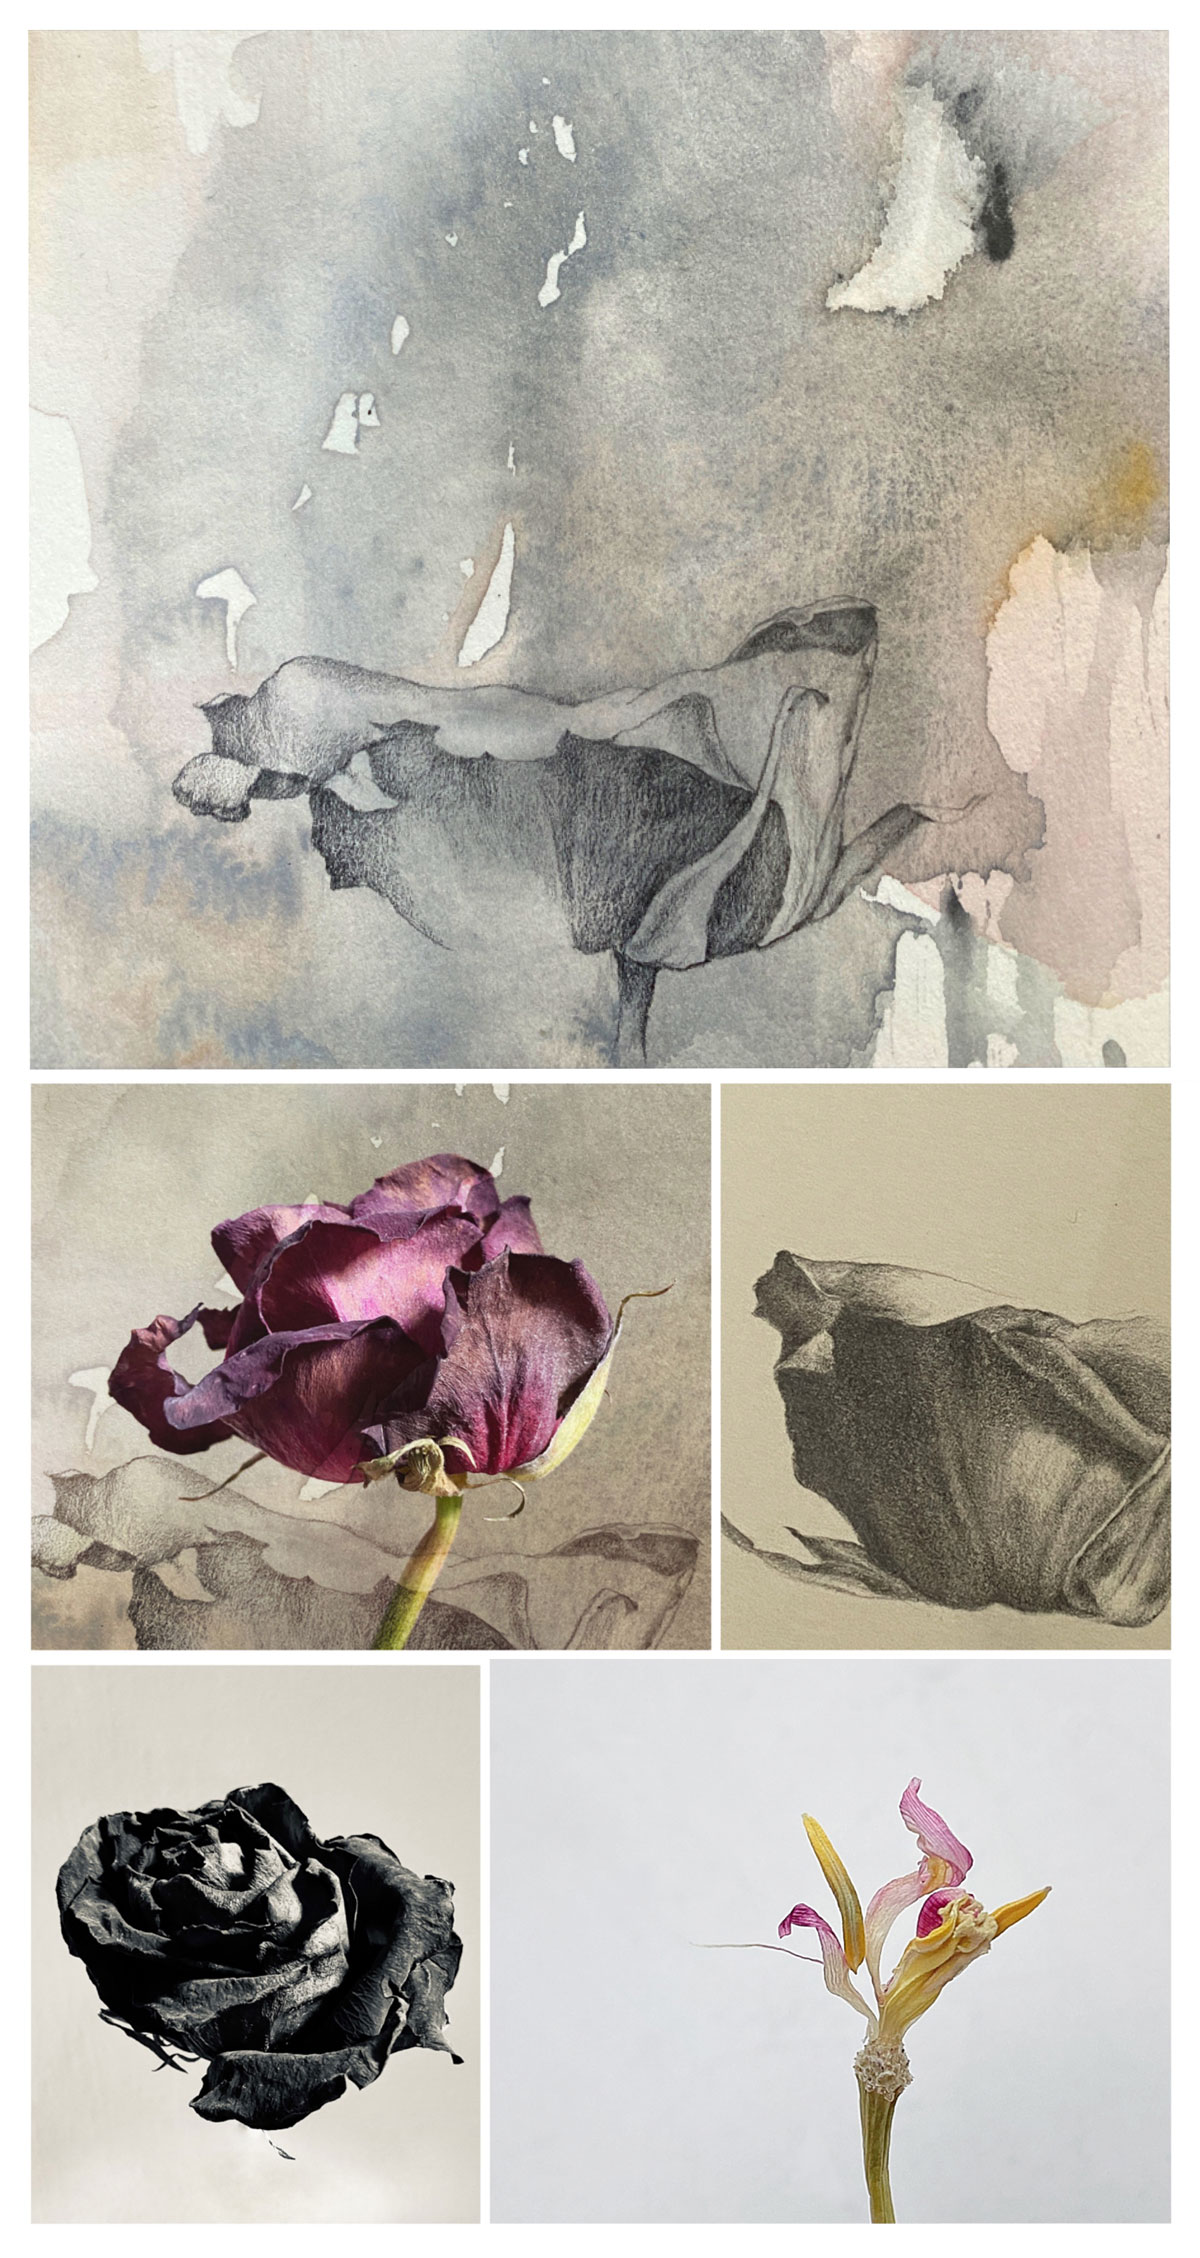 A rose is a rose....studies in media, watercolor, pencil and photography